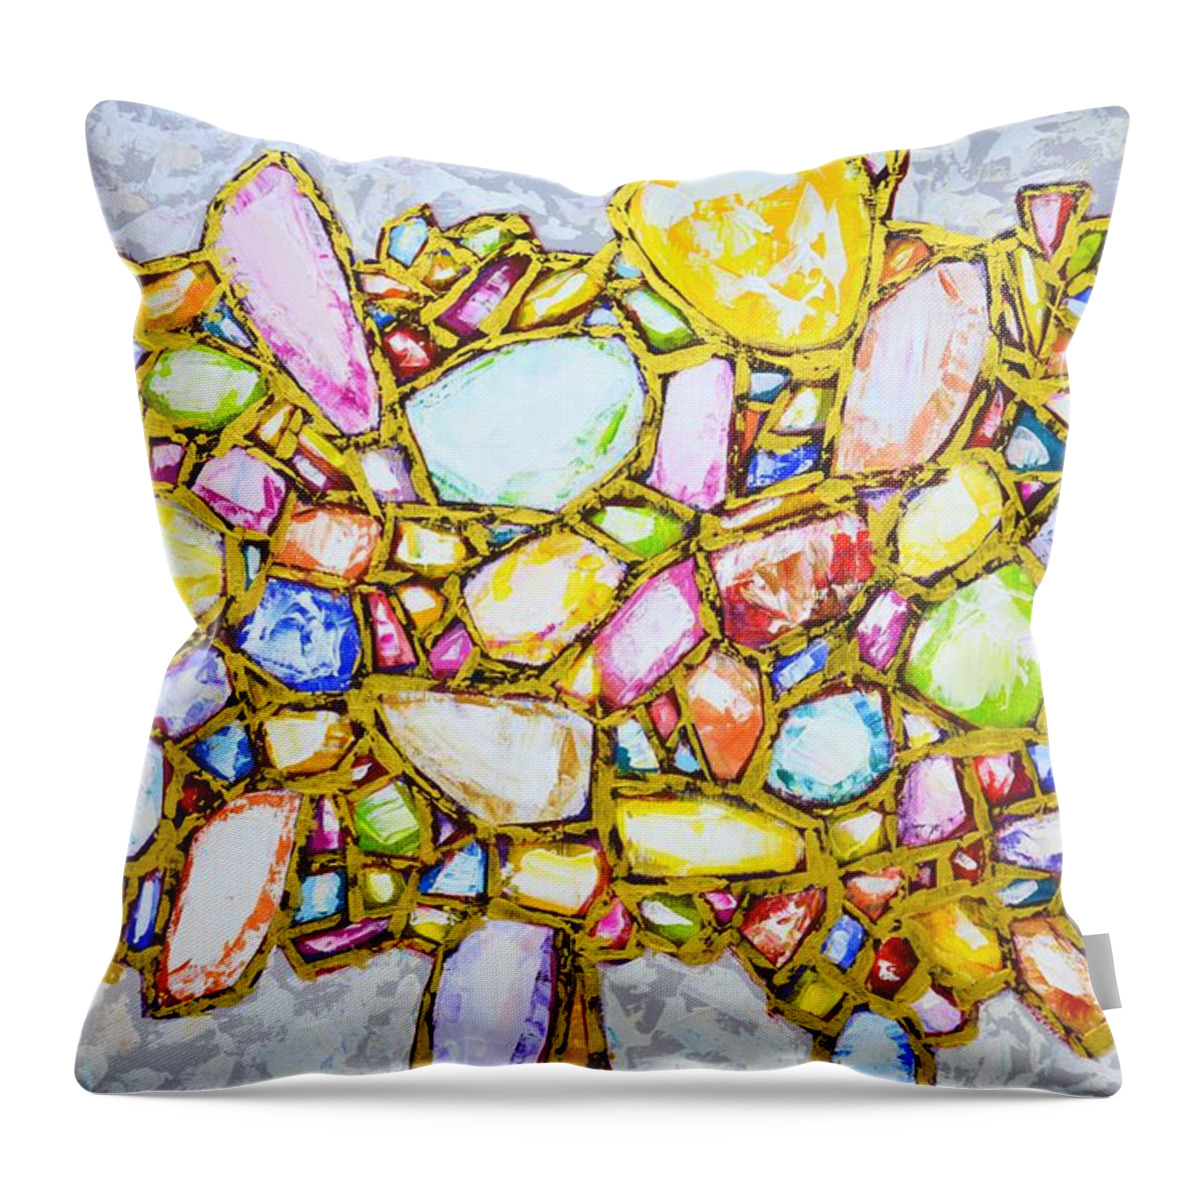 Alchemy Throw Pillow featuring the painting Alchemy. by Iryna Kastsova